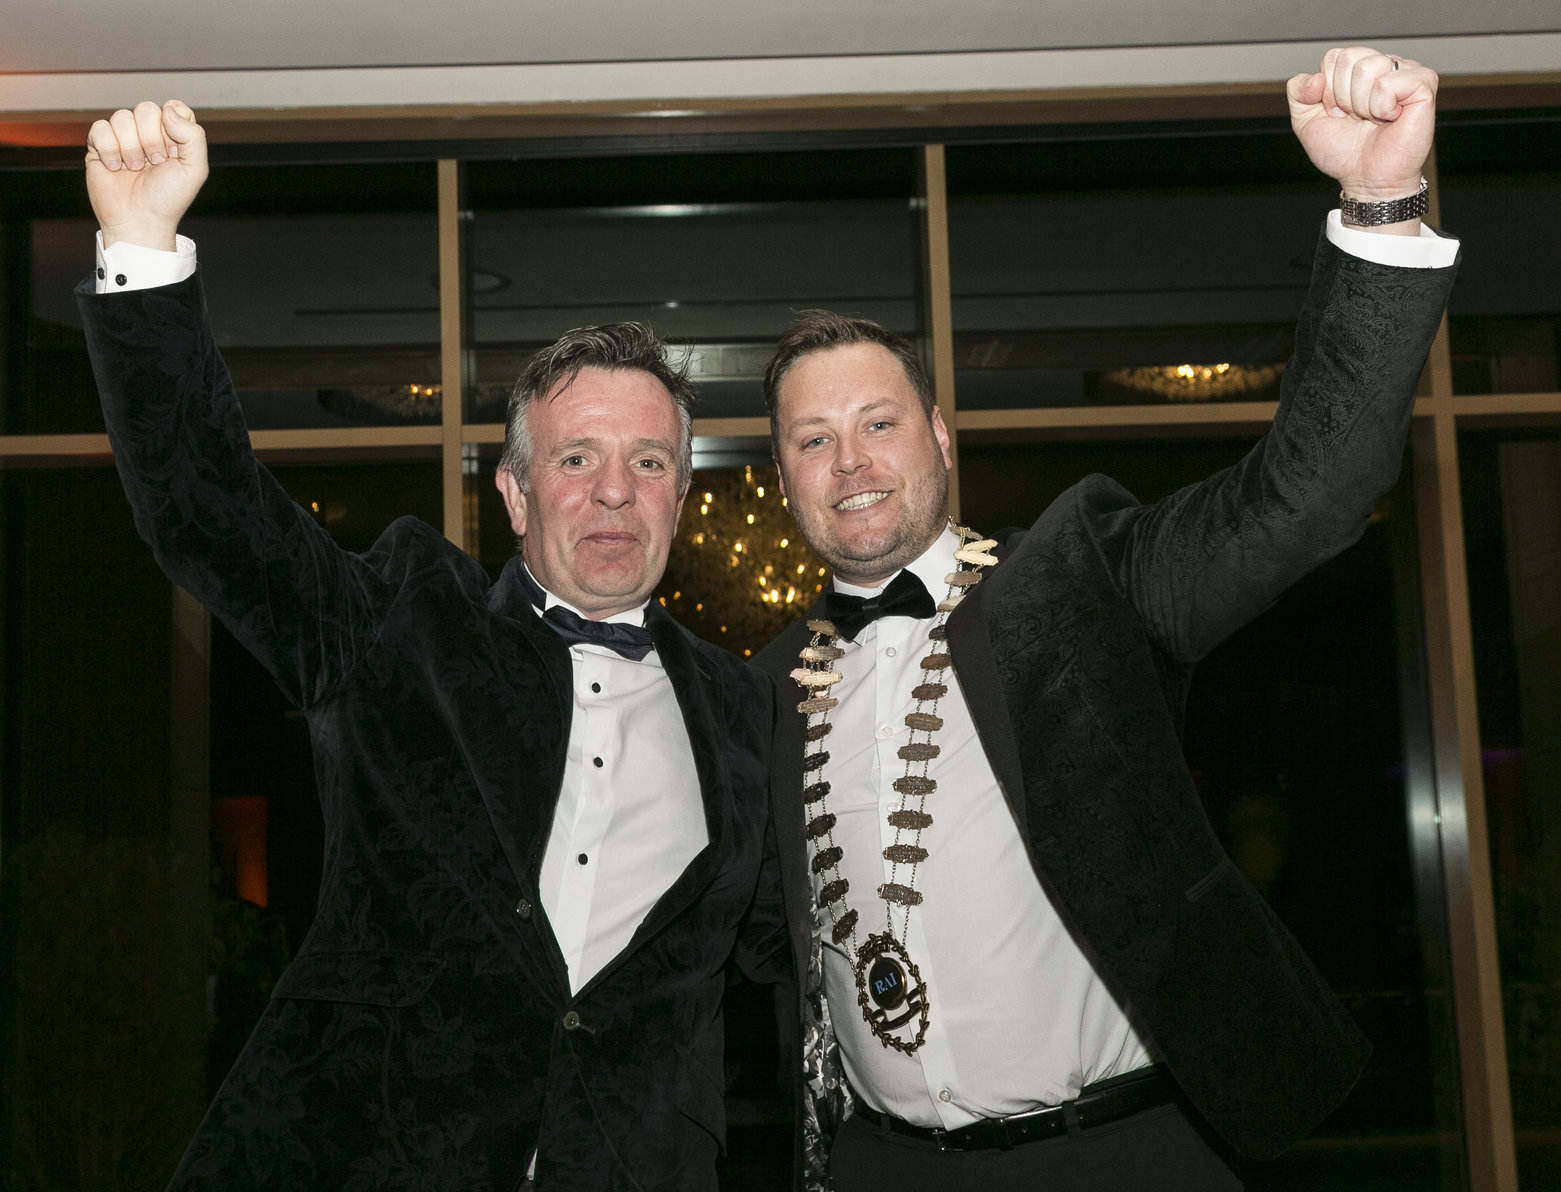 From left: The outgoing RAI President Liam Edwards and the newly appointed President Mark McGowan.